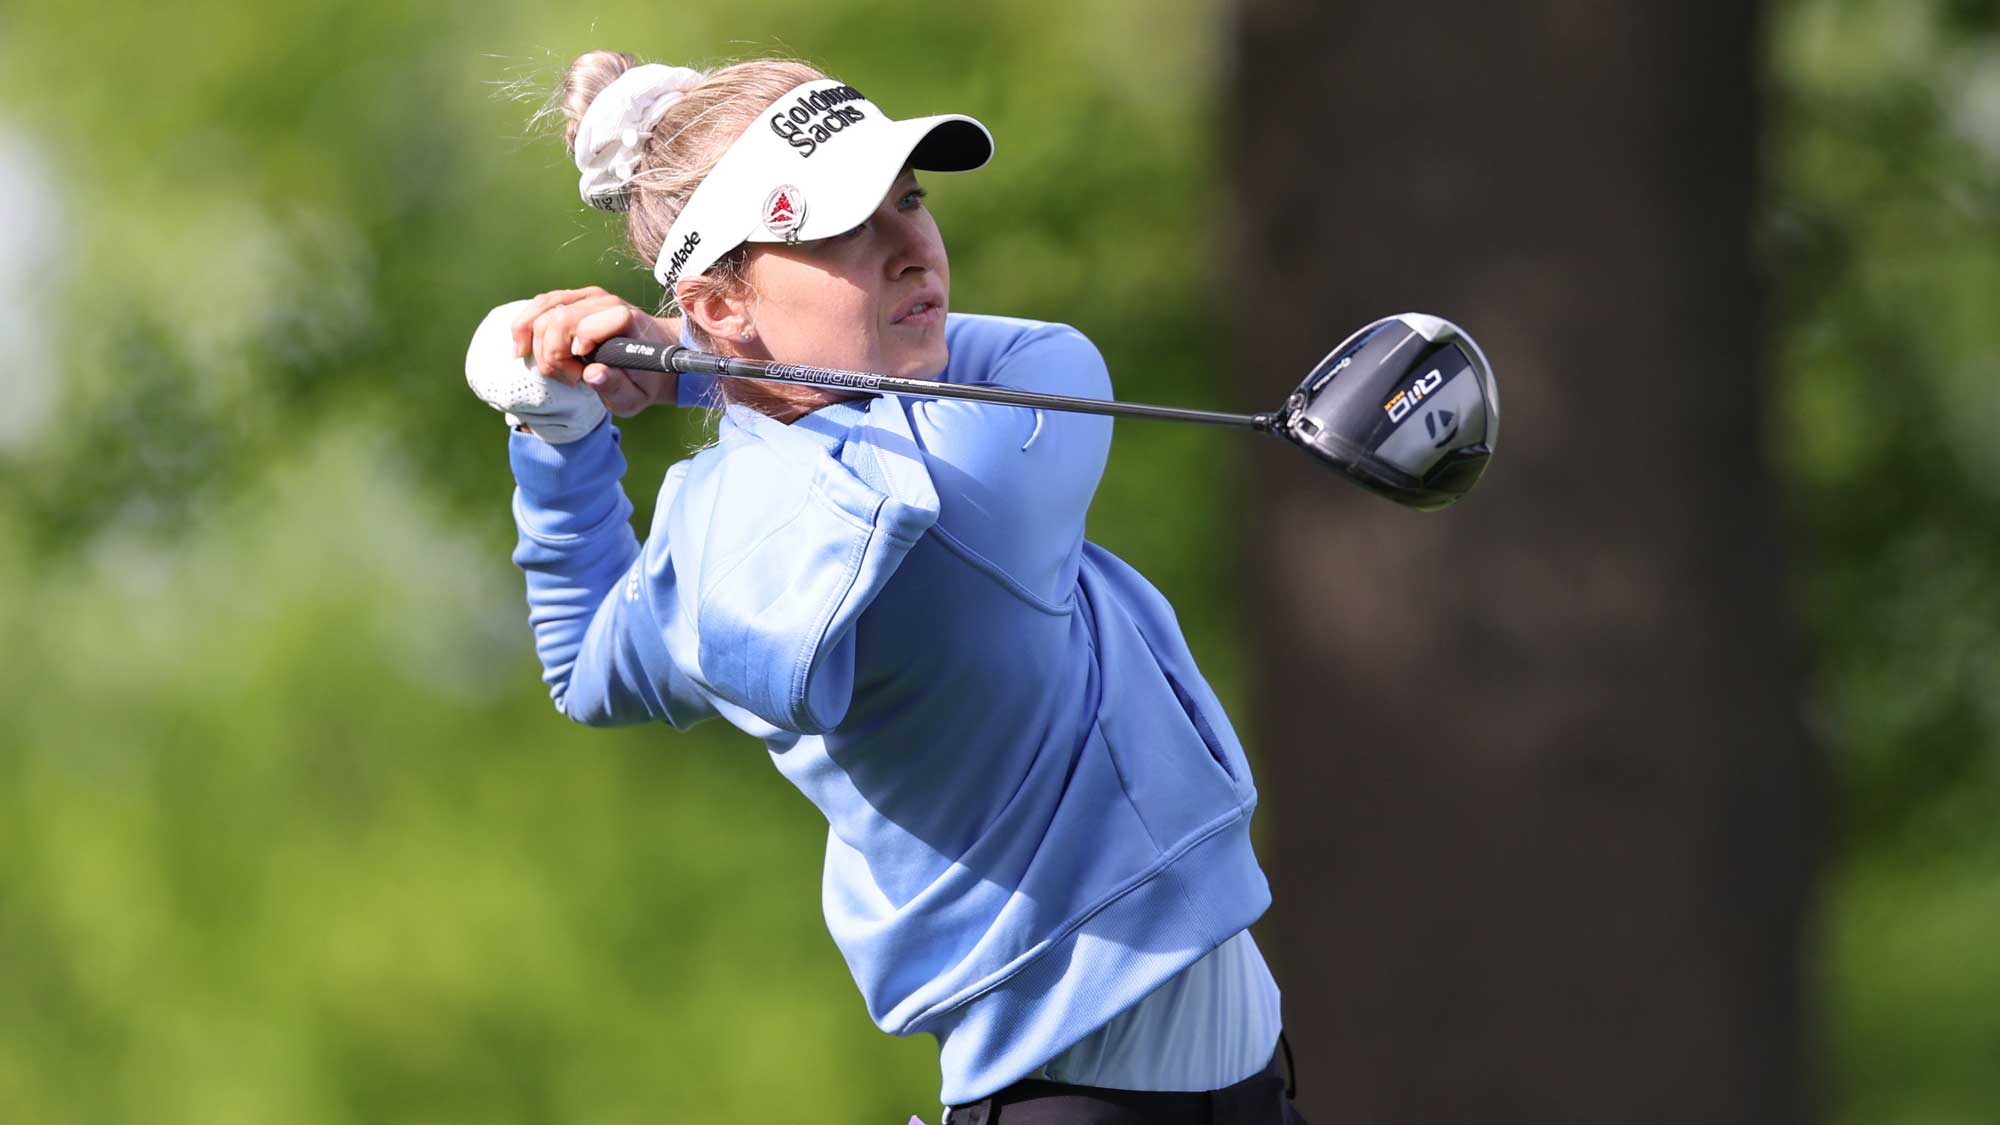 Nelly Korda Already Winning Big Before Sixth Straight Title Pursuit at